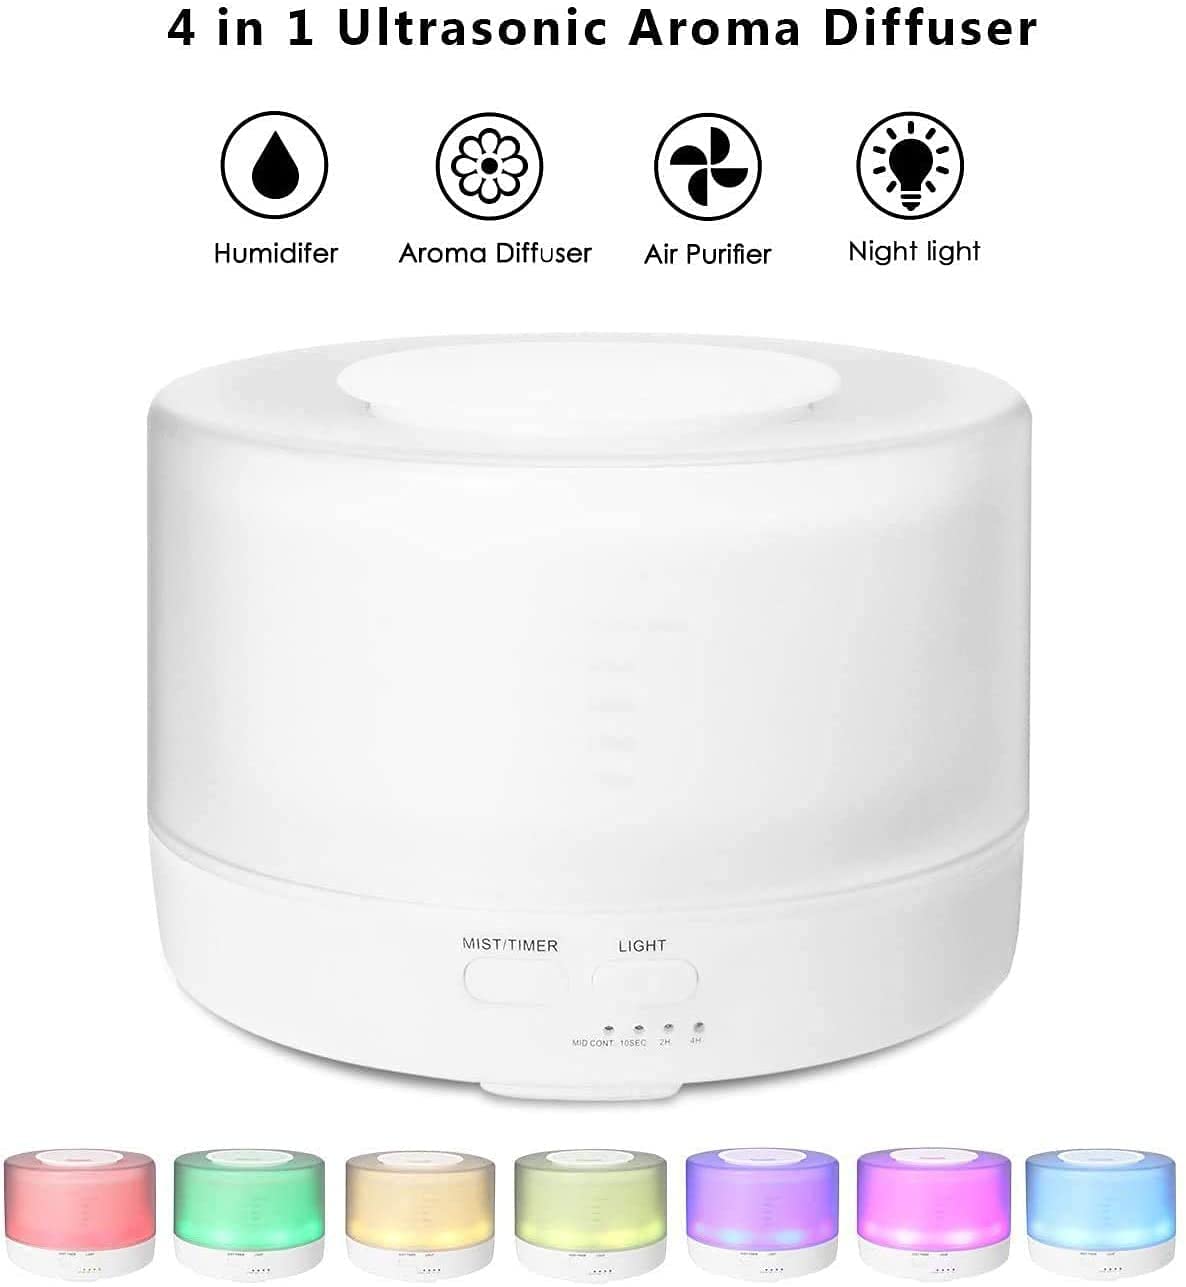 Aromatherapy diffuser with 7 color lights and 4 timer, 500ml, cool mist humidifier with auto shut-off function, ultrasonic oil diffuser bpa-free for home office